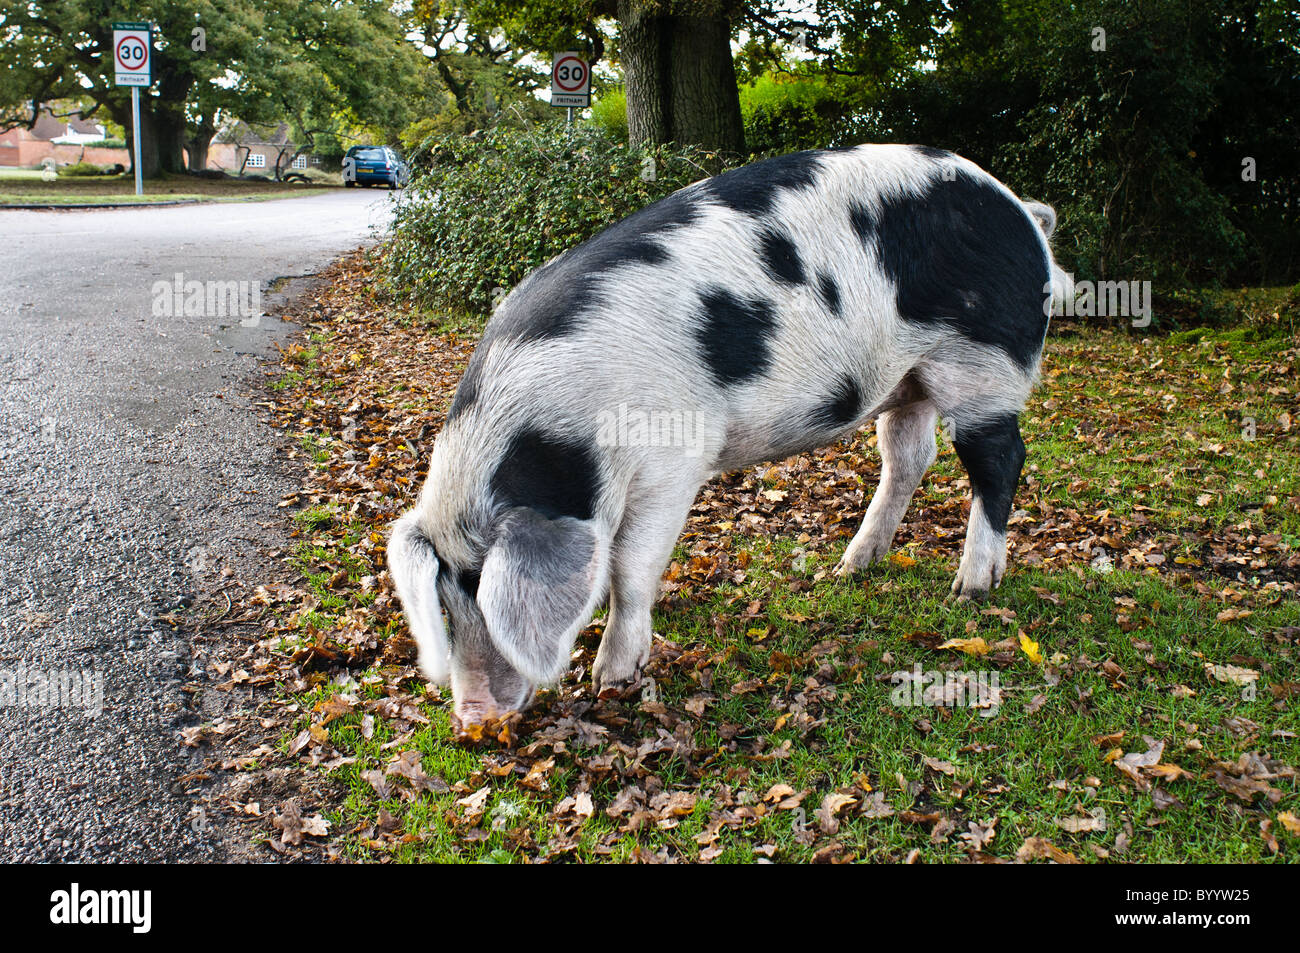 A black and white pig in The New Forest during pannage season. Pigs are put out on The Forest to forage for acorns.  Stock Photo